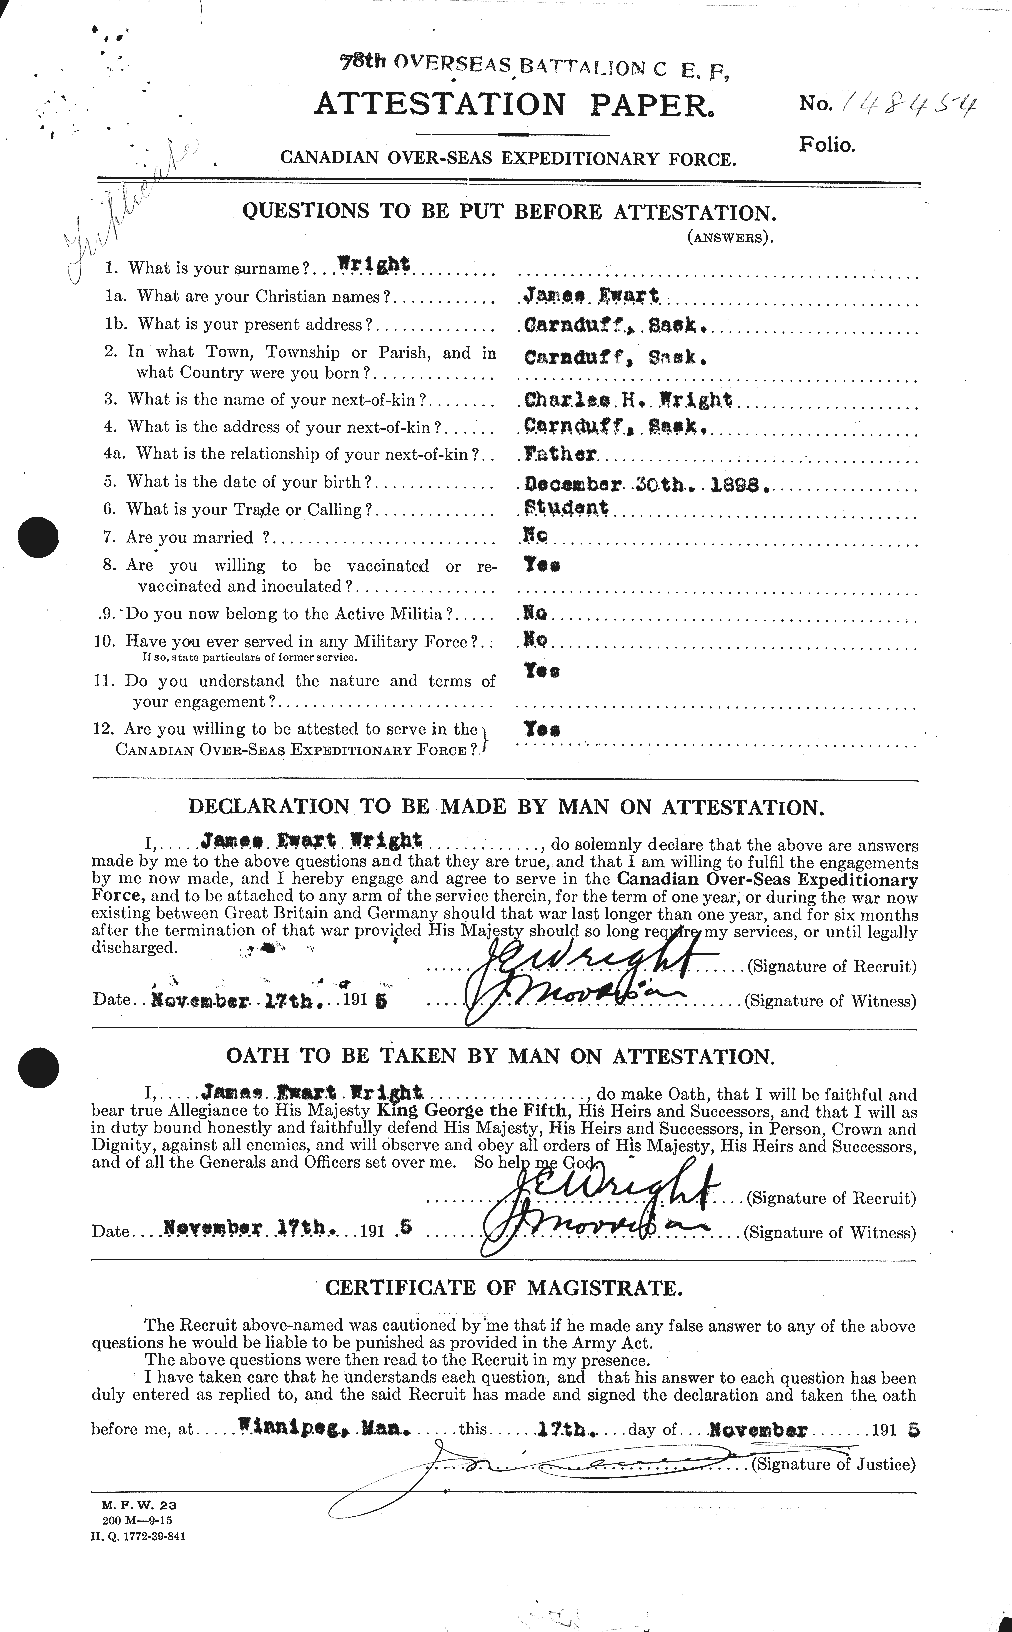 Personnel Records of the First World War - CEF 687015a